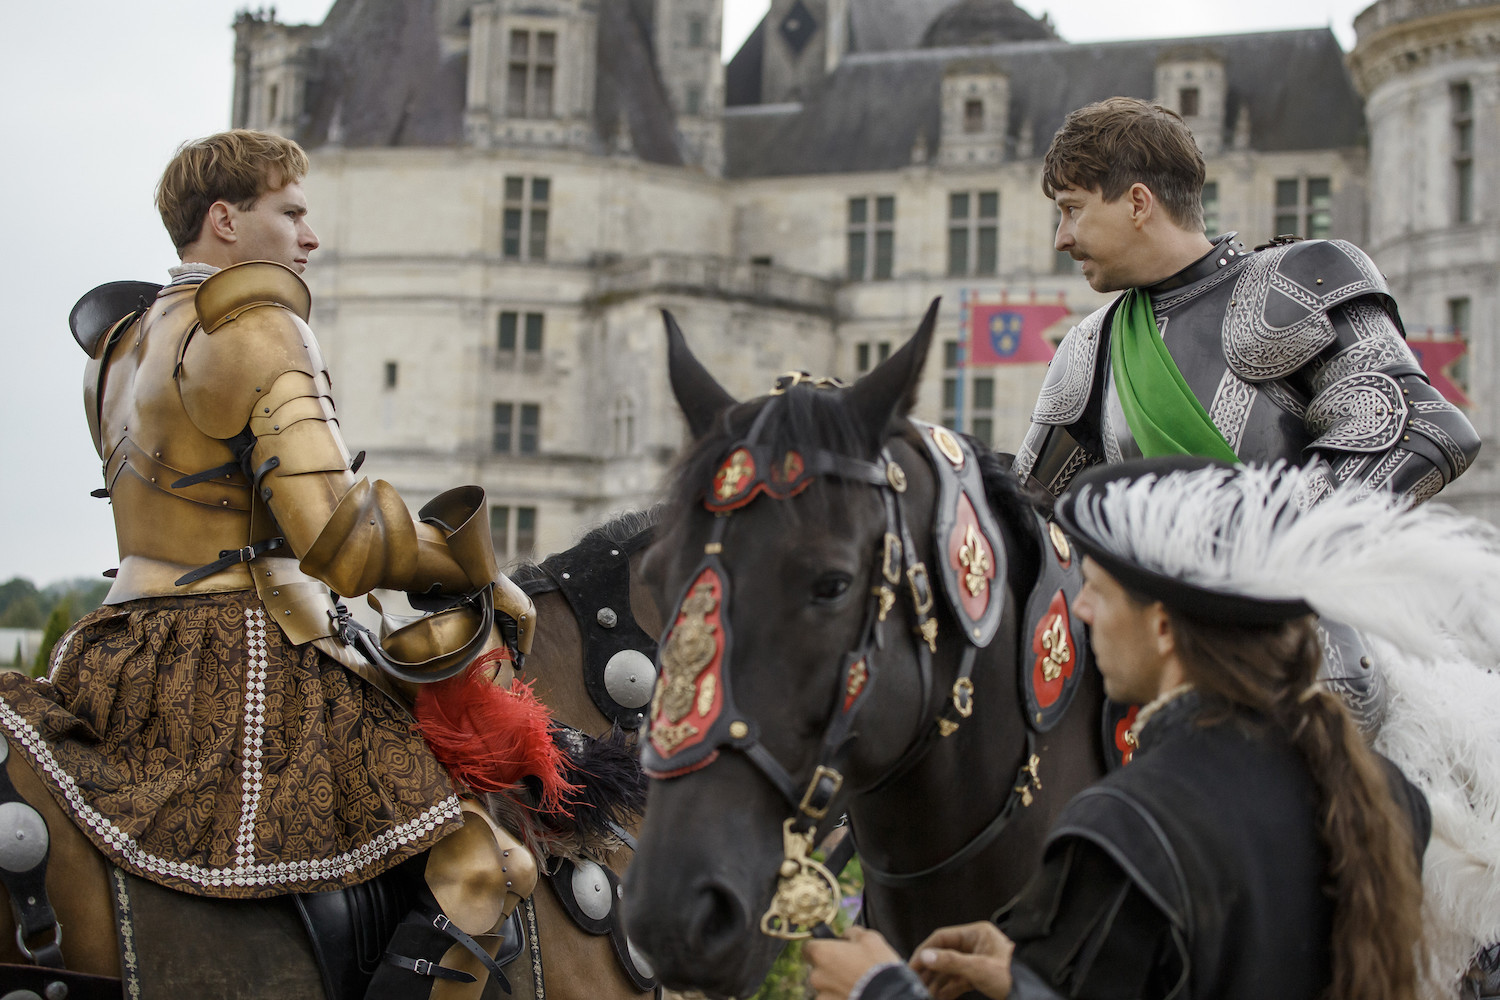 Picture shows: King Henri (Lee Ingleby) and Gabriel de Lorges de Montgommery (Nicholas Robin) in armor and on horseback about to charge each other.